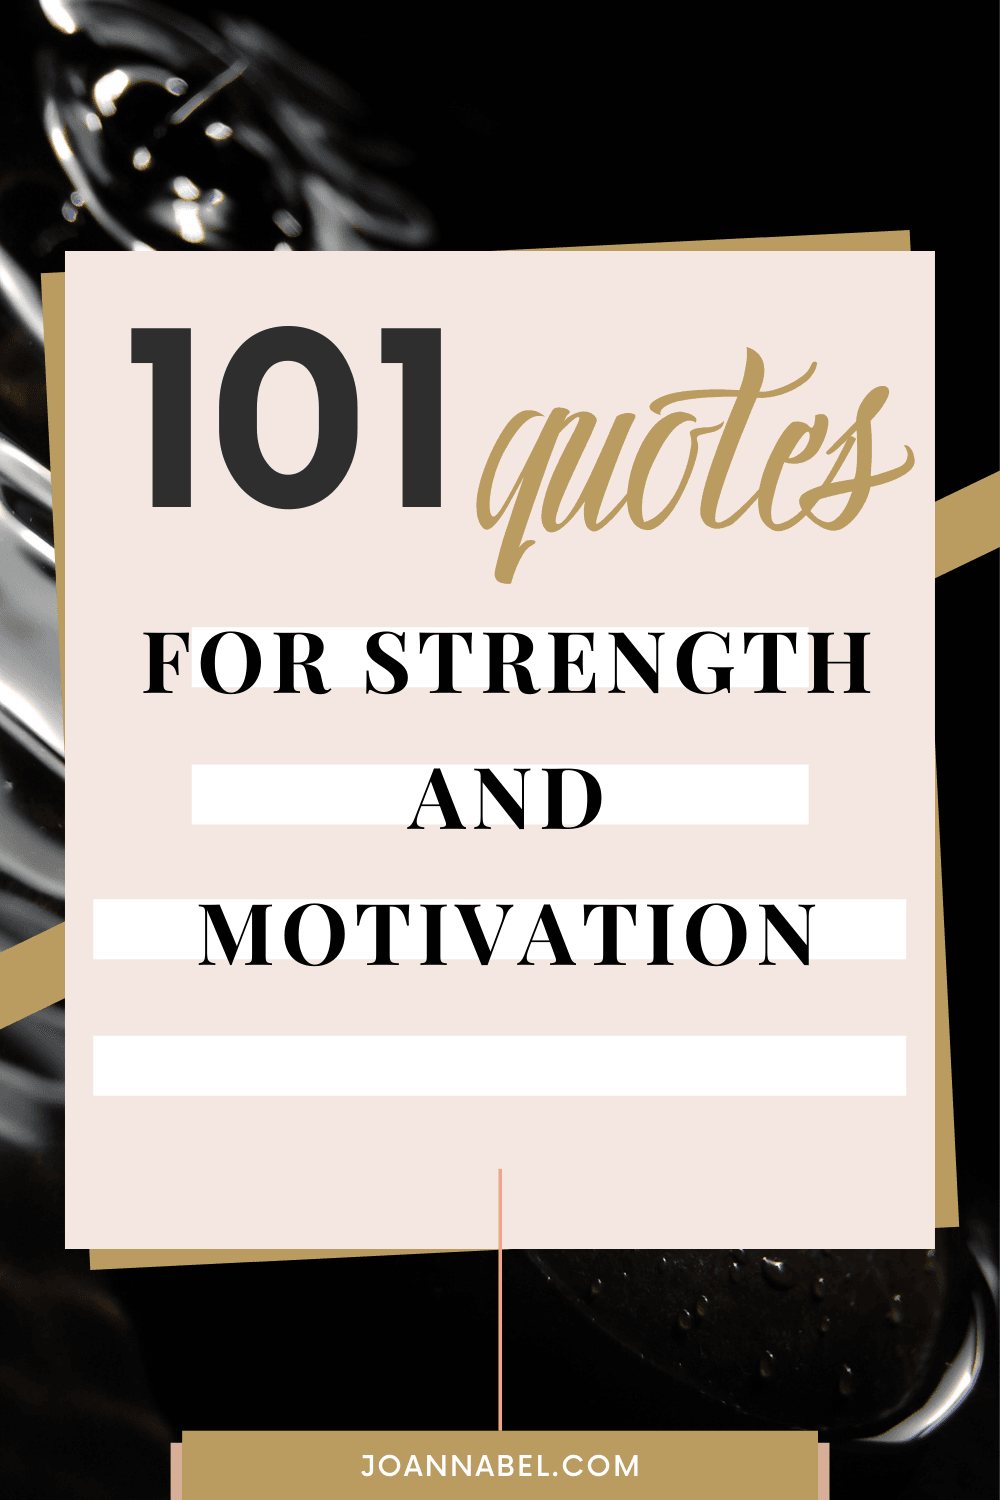 Pin image with text in front - 101 quotes for strength and motivation and in the background is a photo of black water